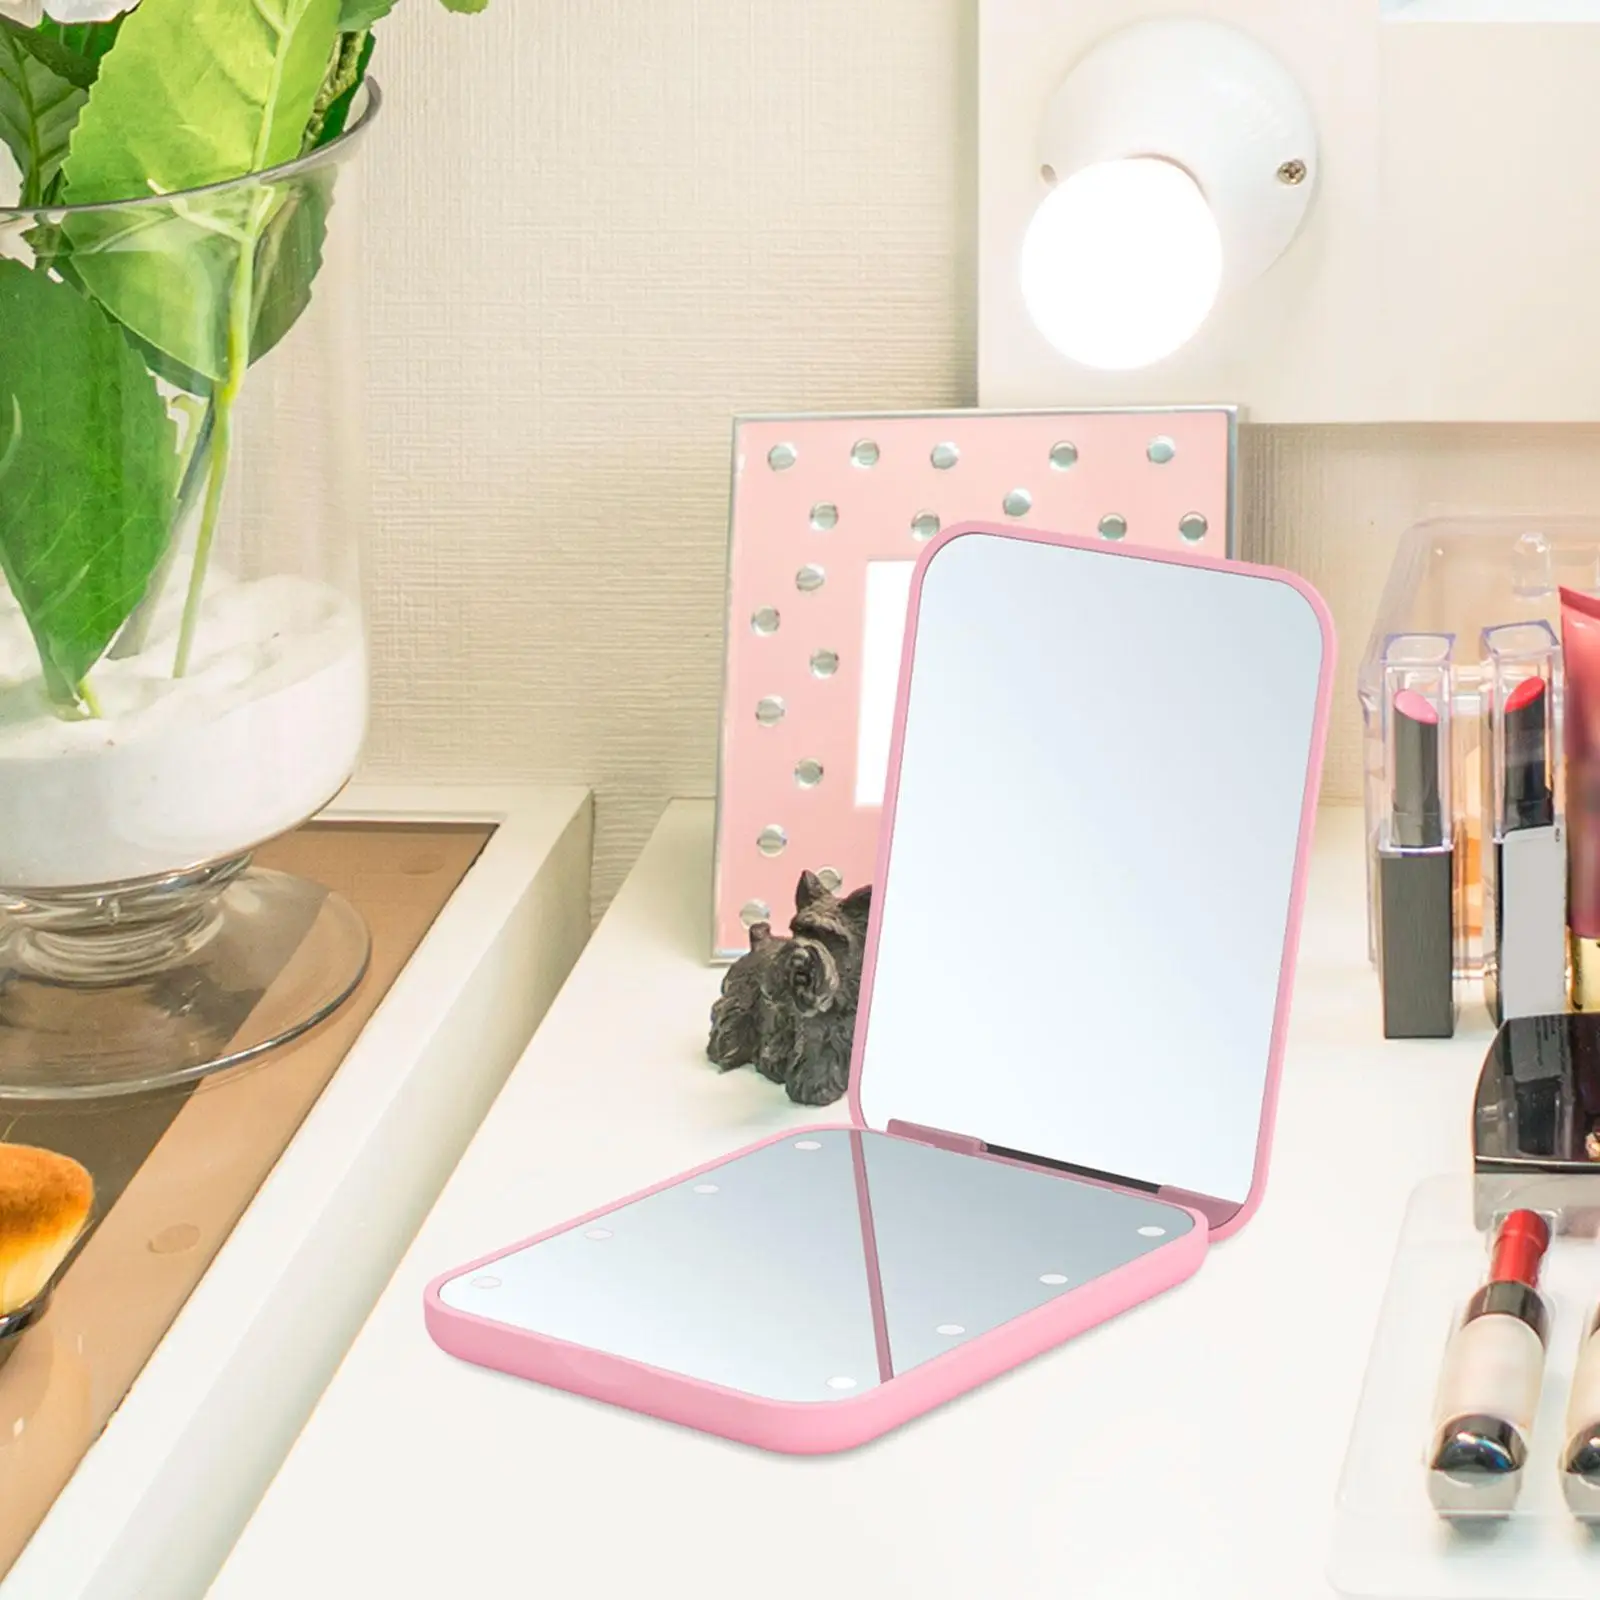 LED Makeup Mirror with 2x Magnifying Desktop Cosmetic Mirror Lighted Makeup Mirror for Travel Essential Bedroom Vanity Dormitory